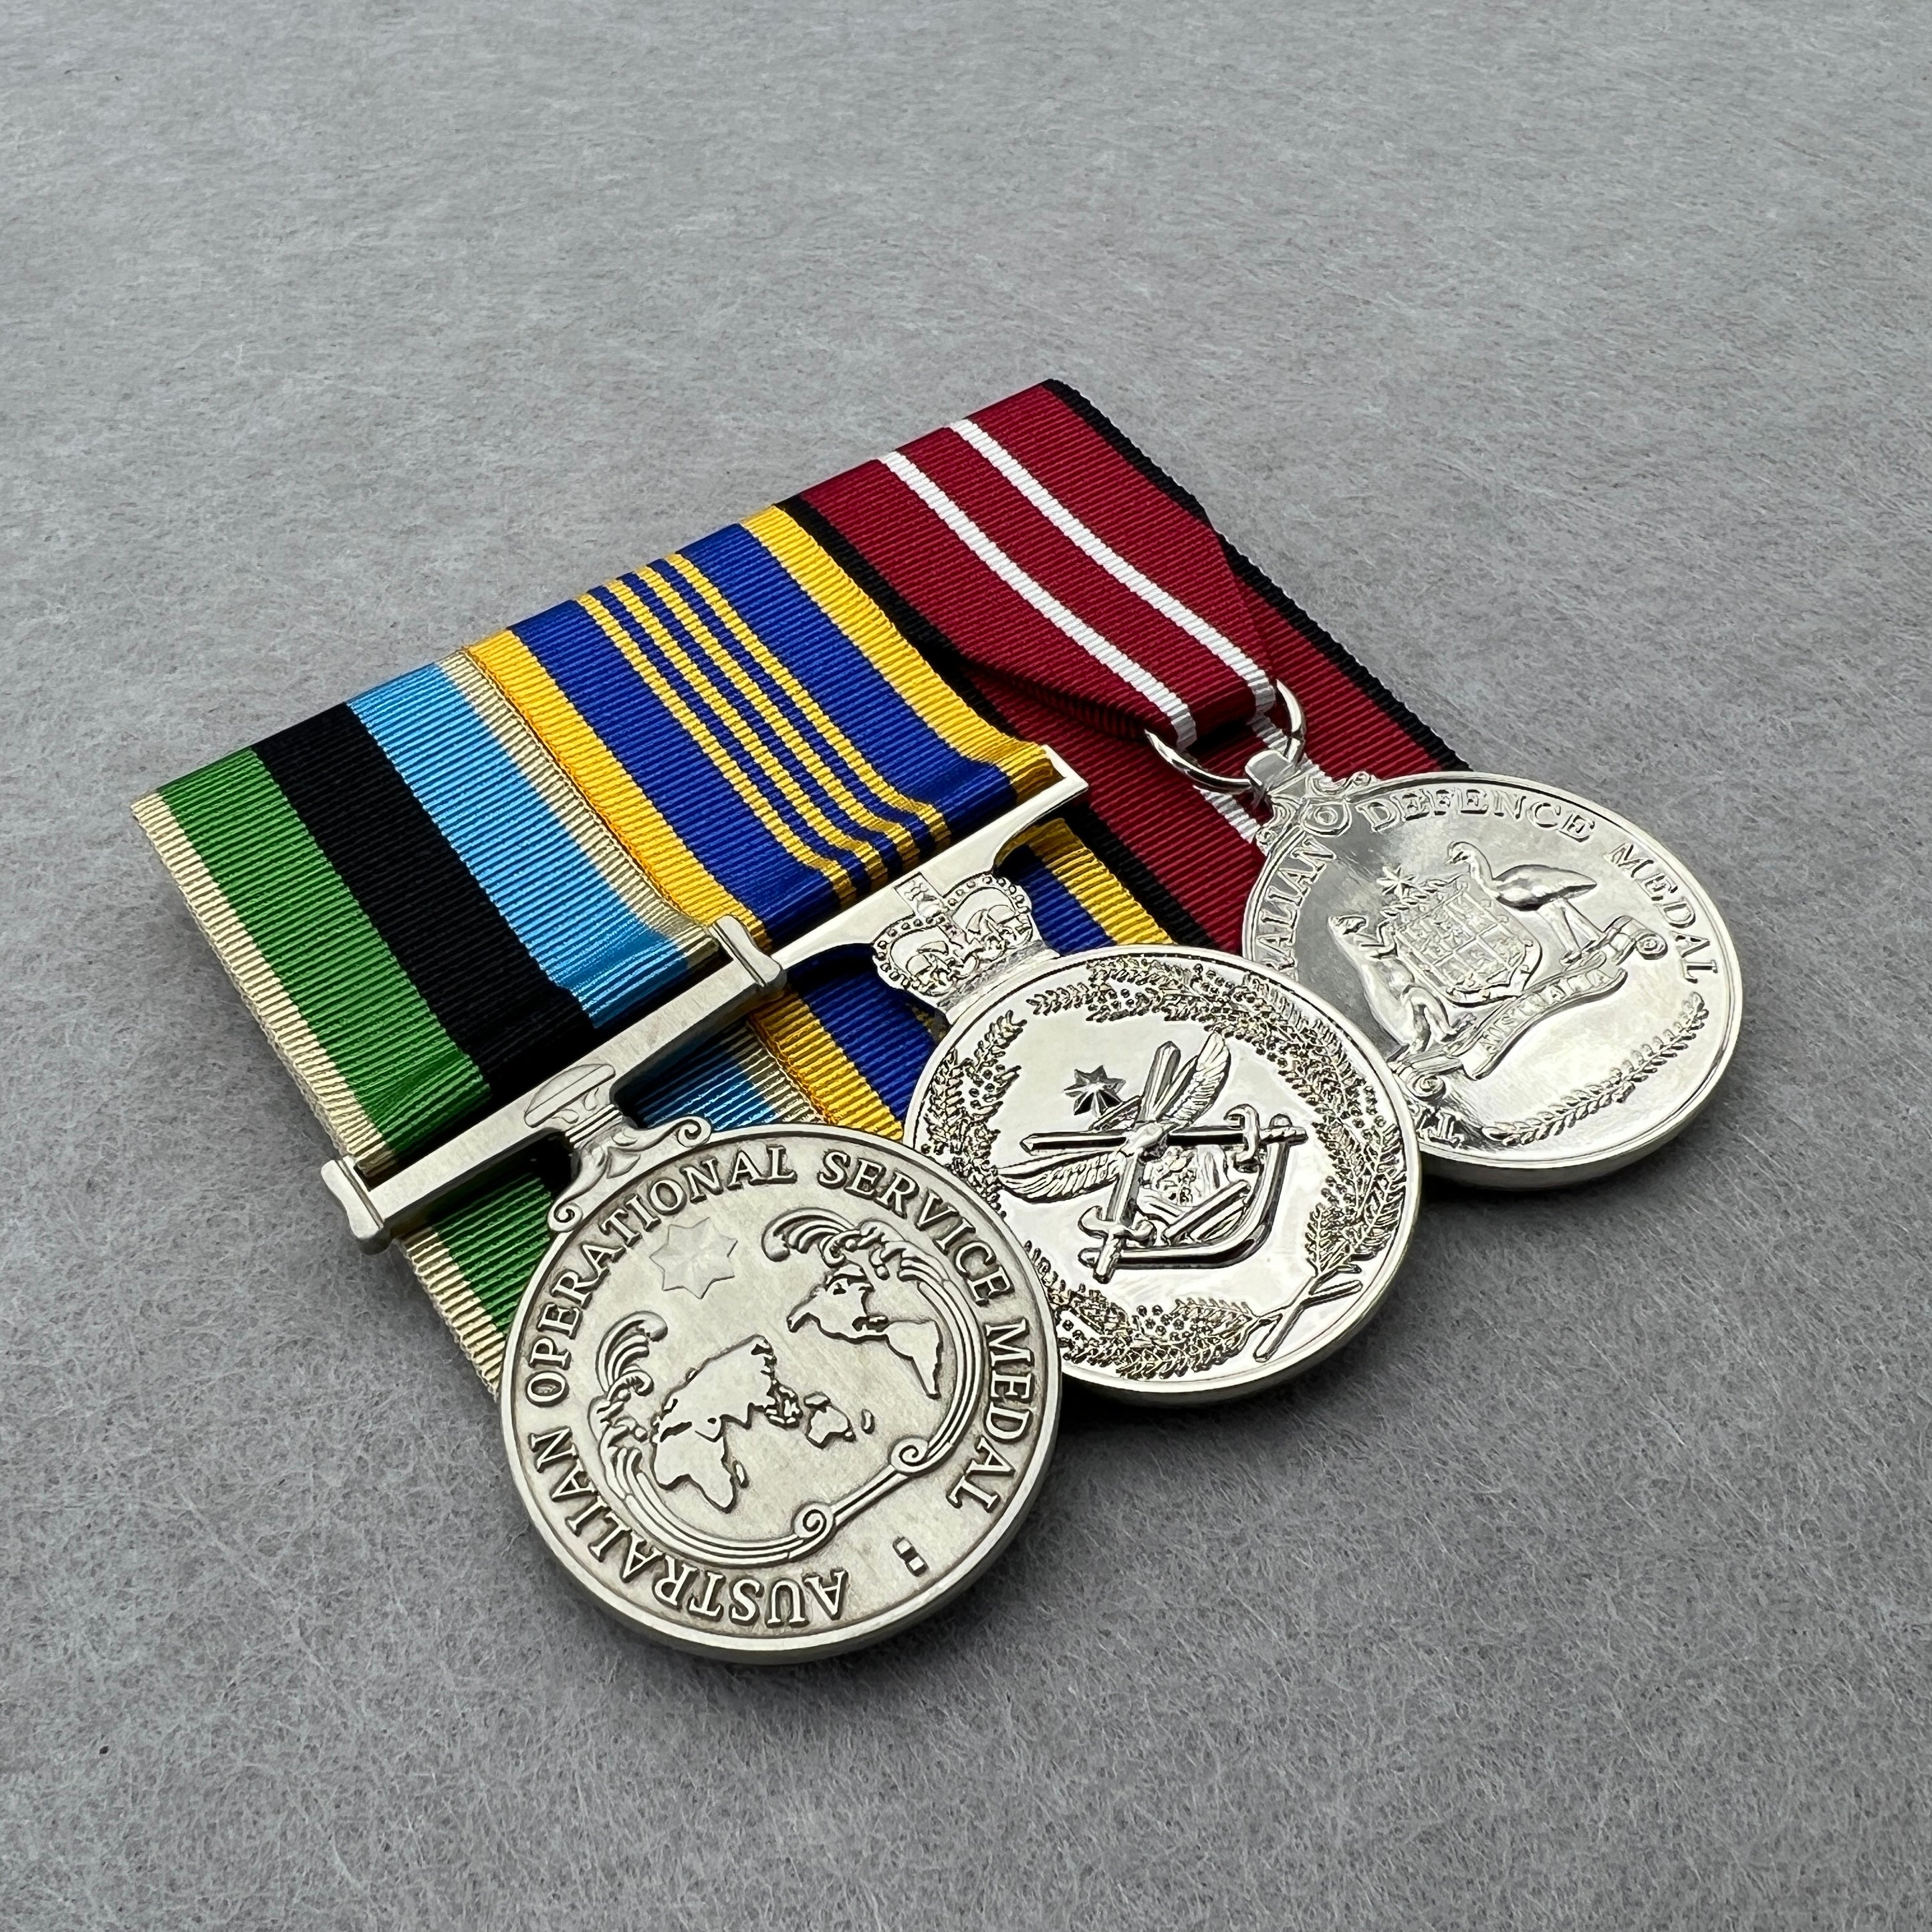 OSM Greater Middle East / Long Service Trio - Foxhole Medals